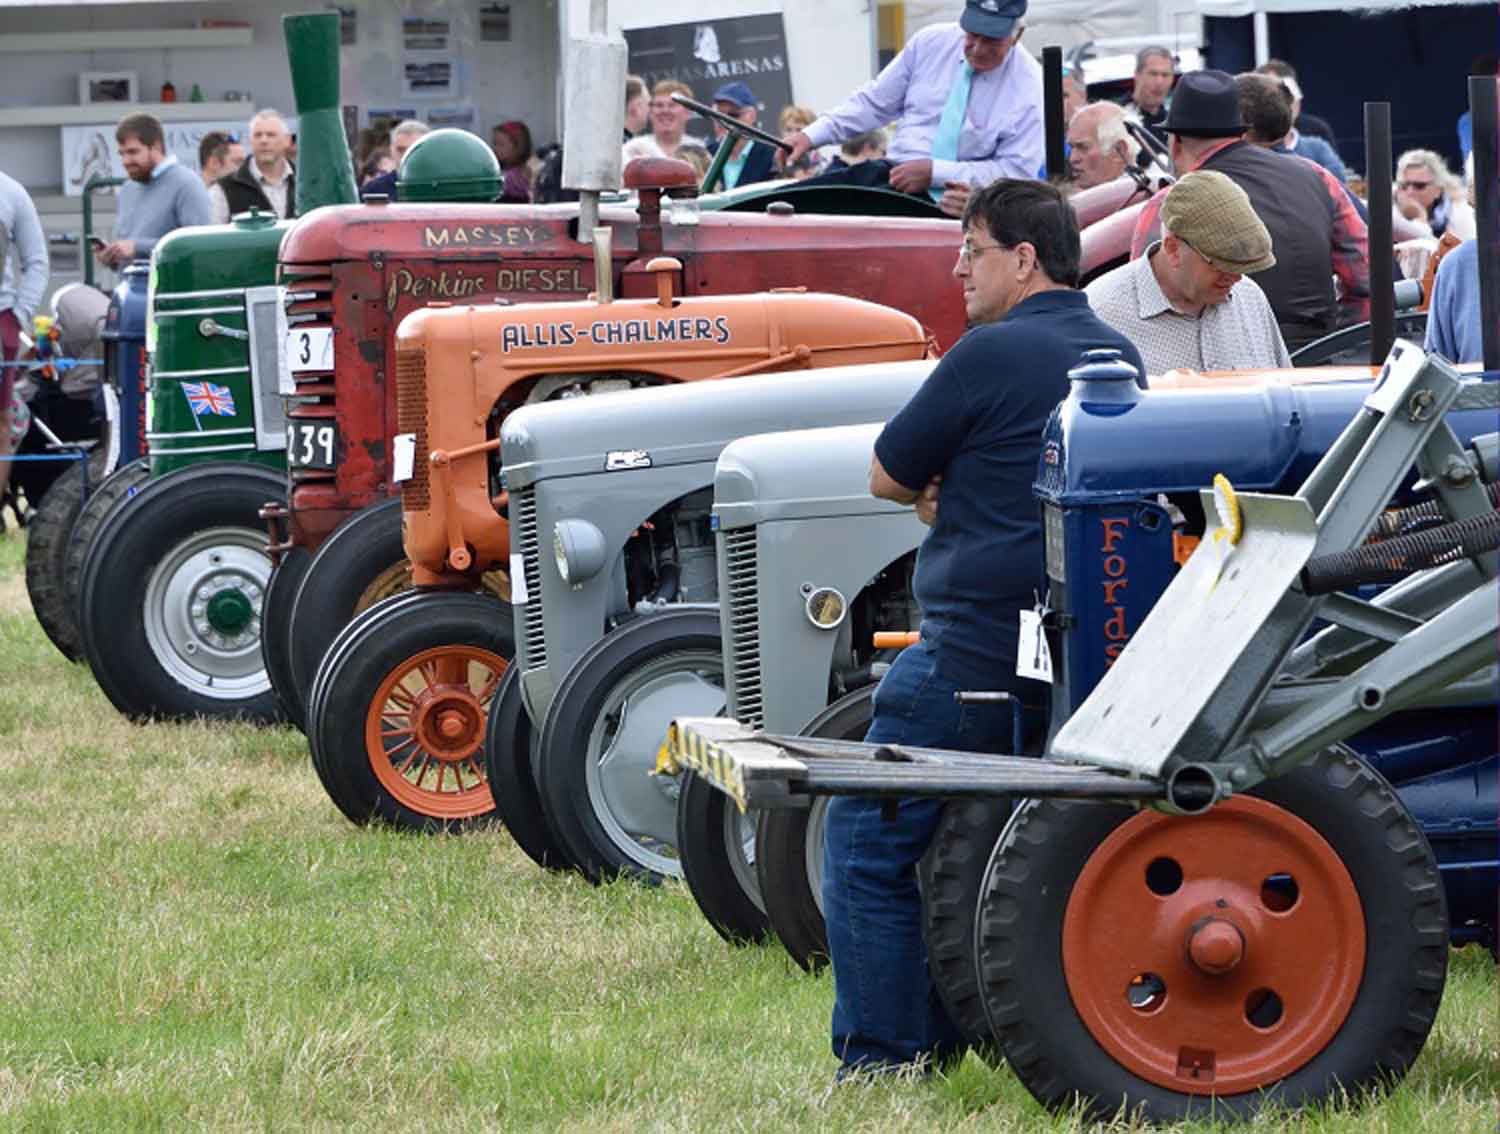 Vintage tractors on display at last year’s Tockwith Show